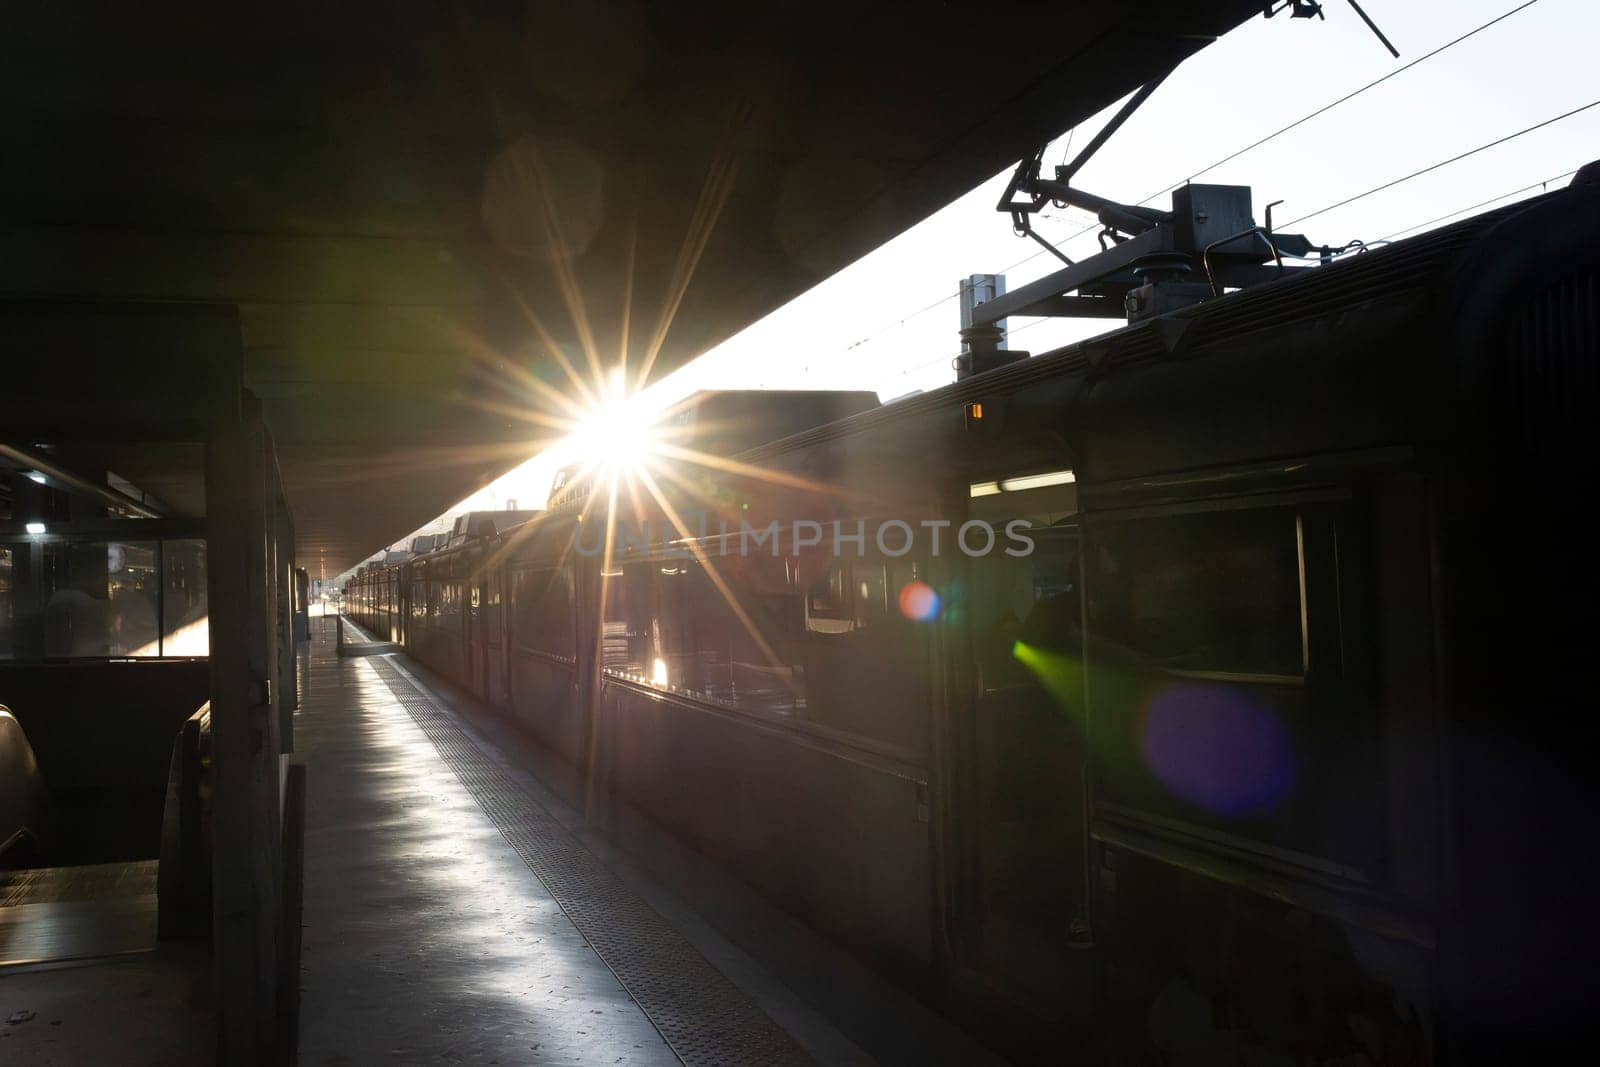 A train is on the tracks with the sun shining on it, sunset